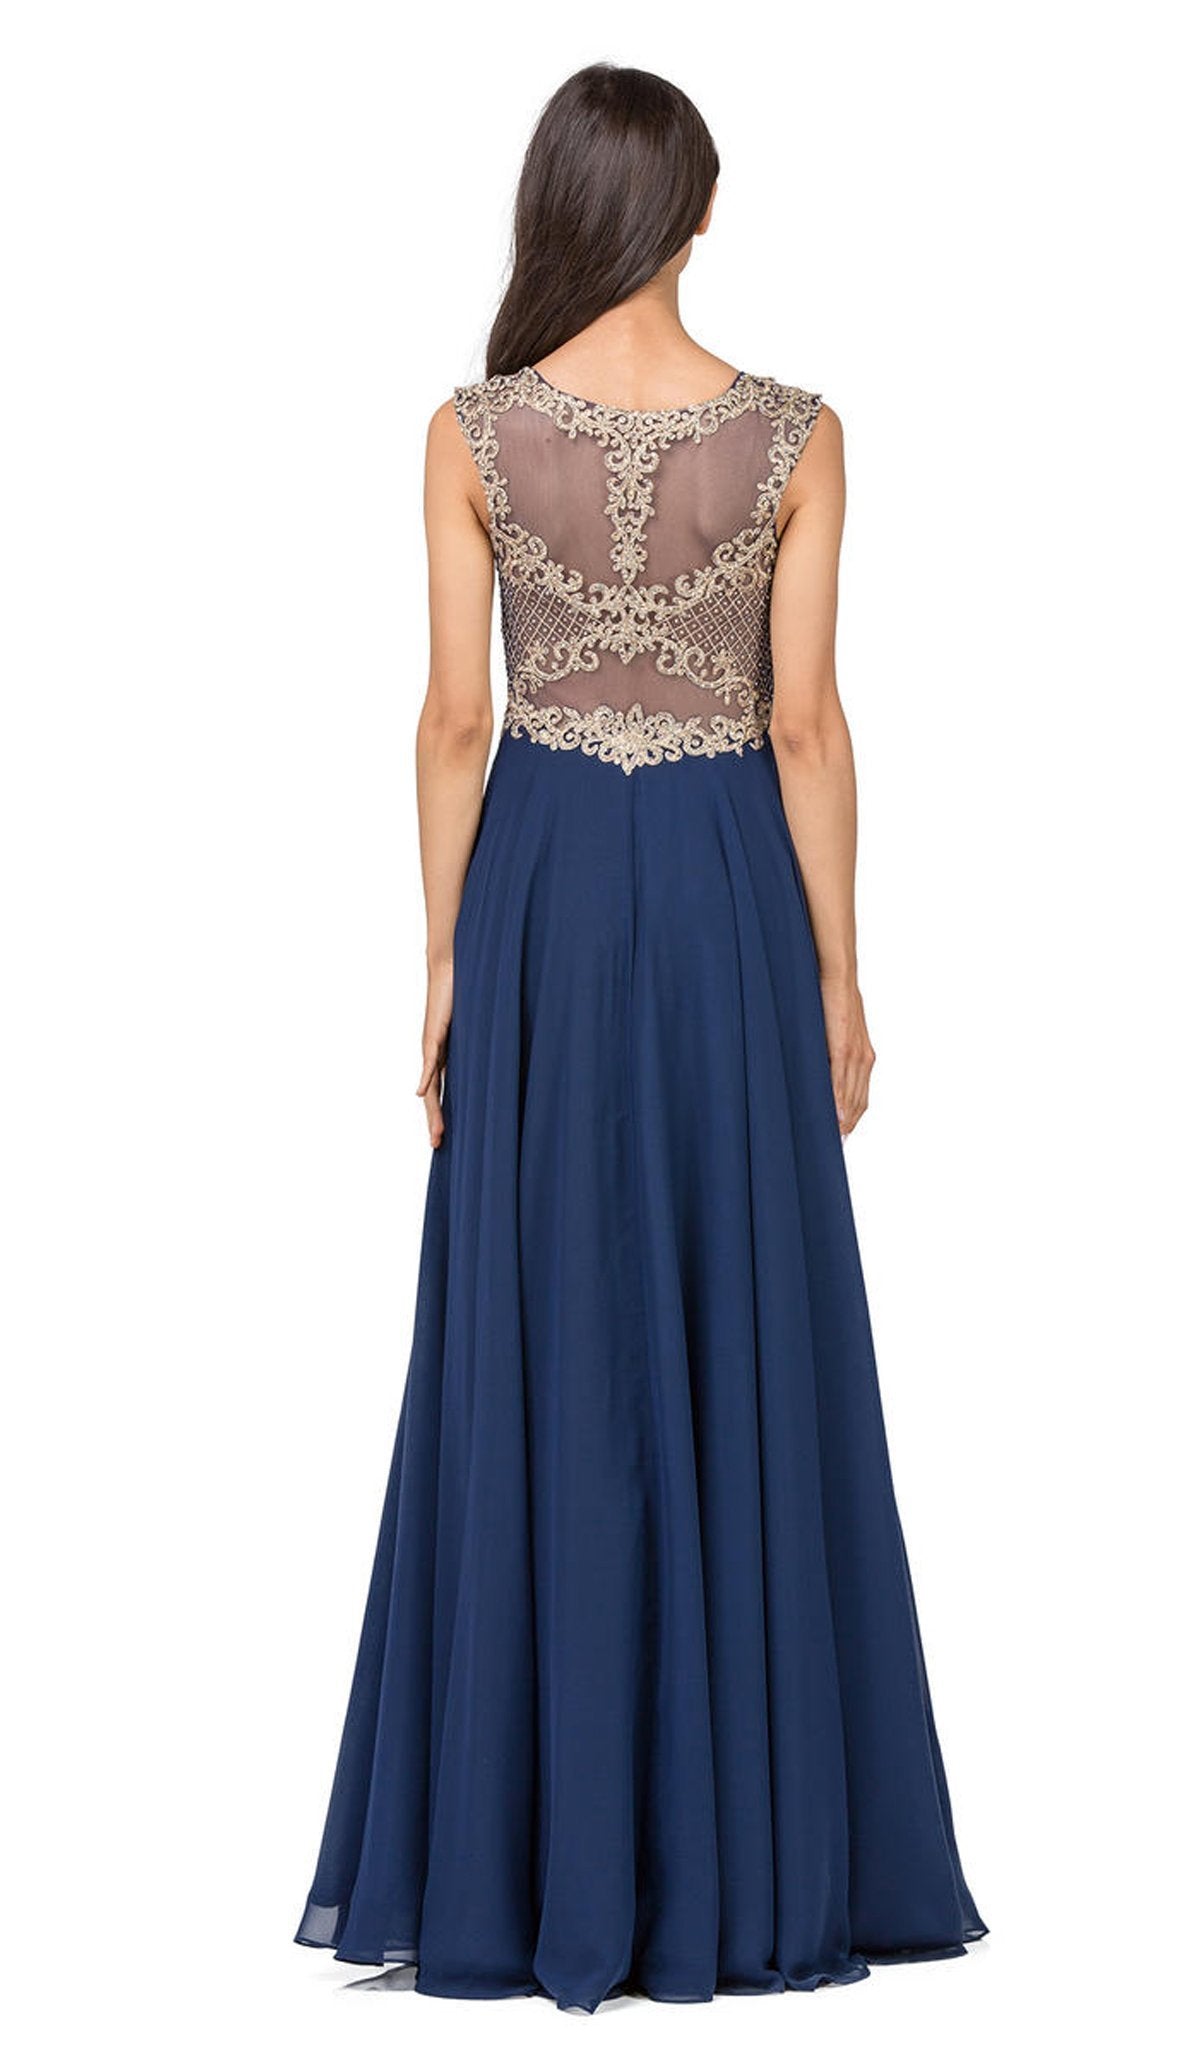 Dancing Queen - 9266 Embroidered-Lace Bodice Chiffon Long Prom Dress Special Occasion Dress